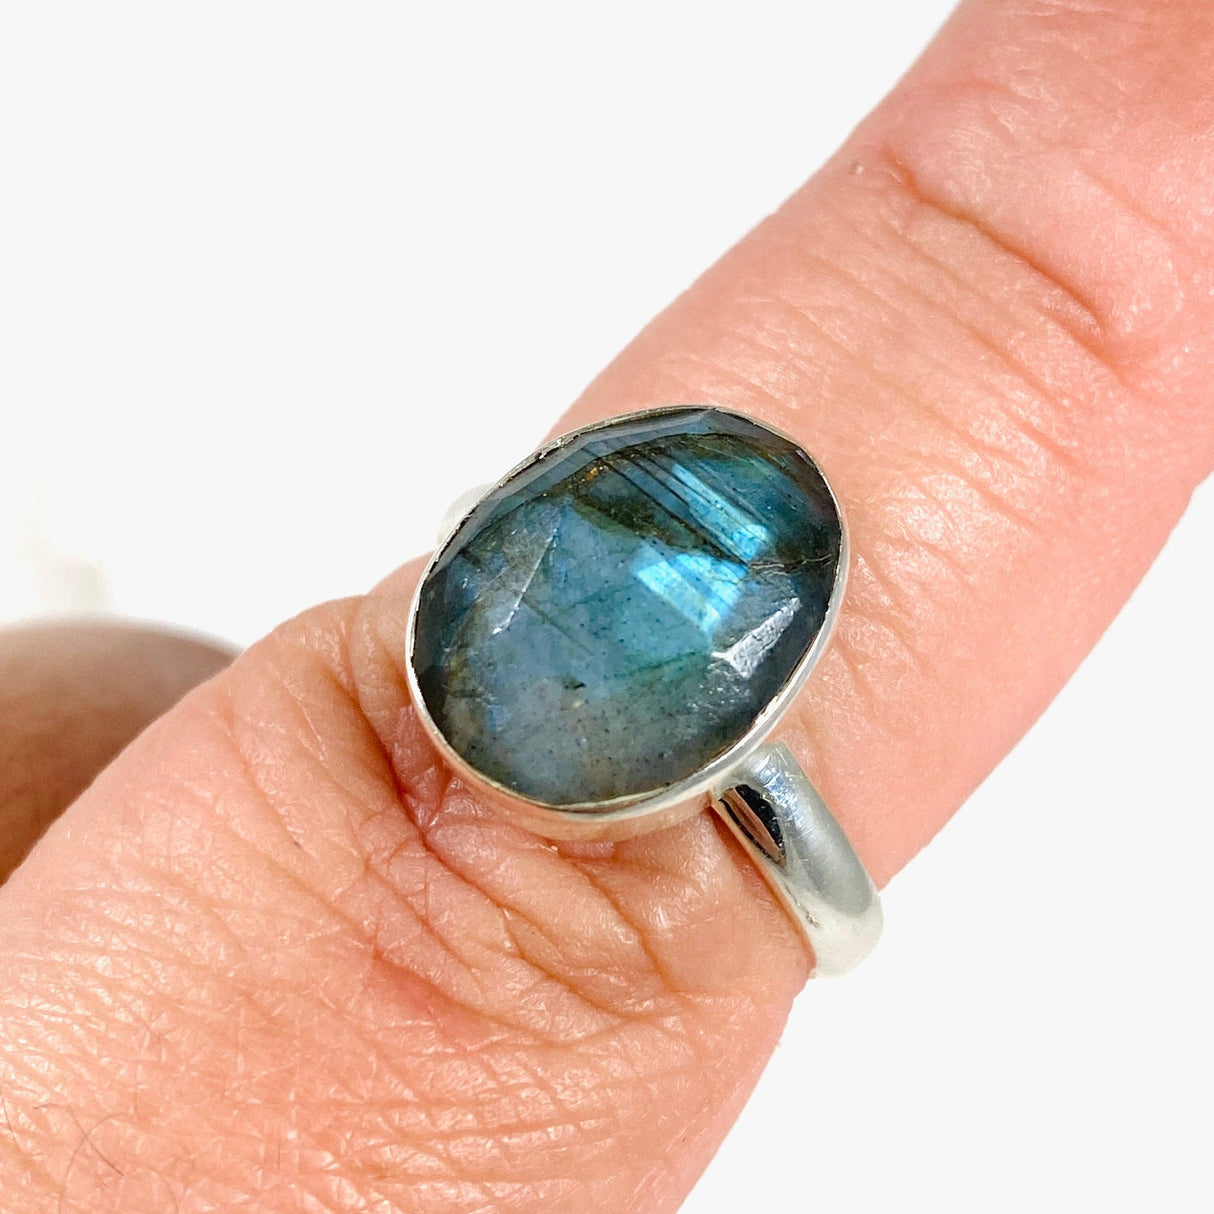  Blue iridescent Labradorite faceted gemstone and silver ring on a finger